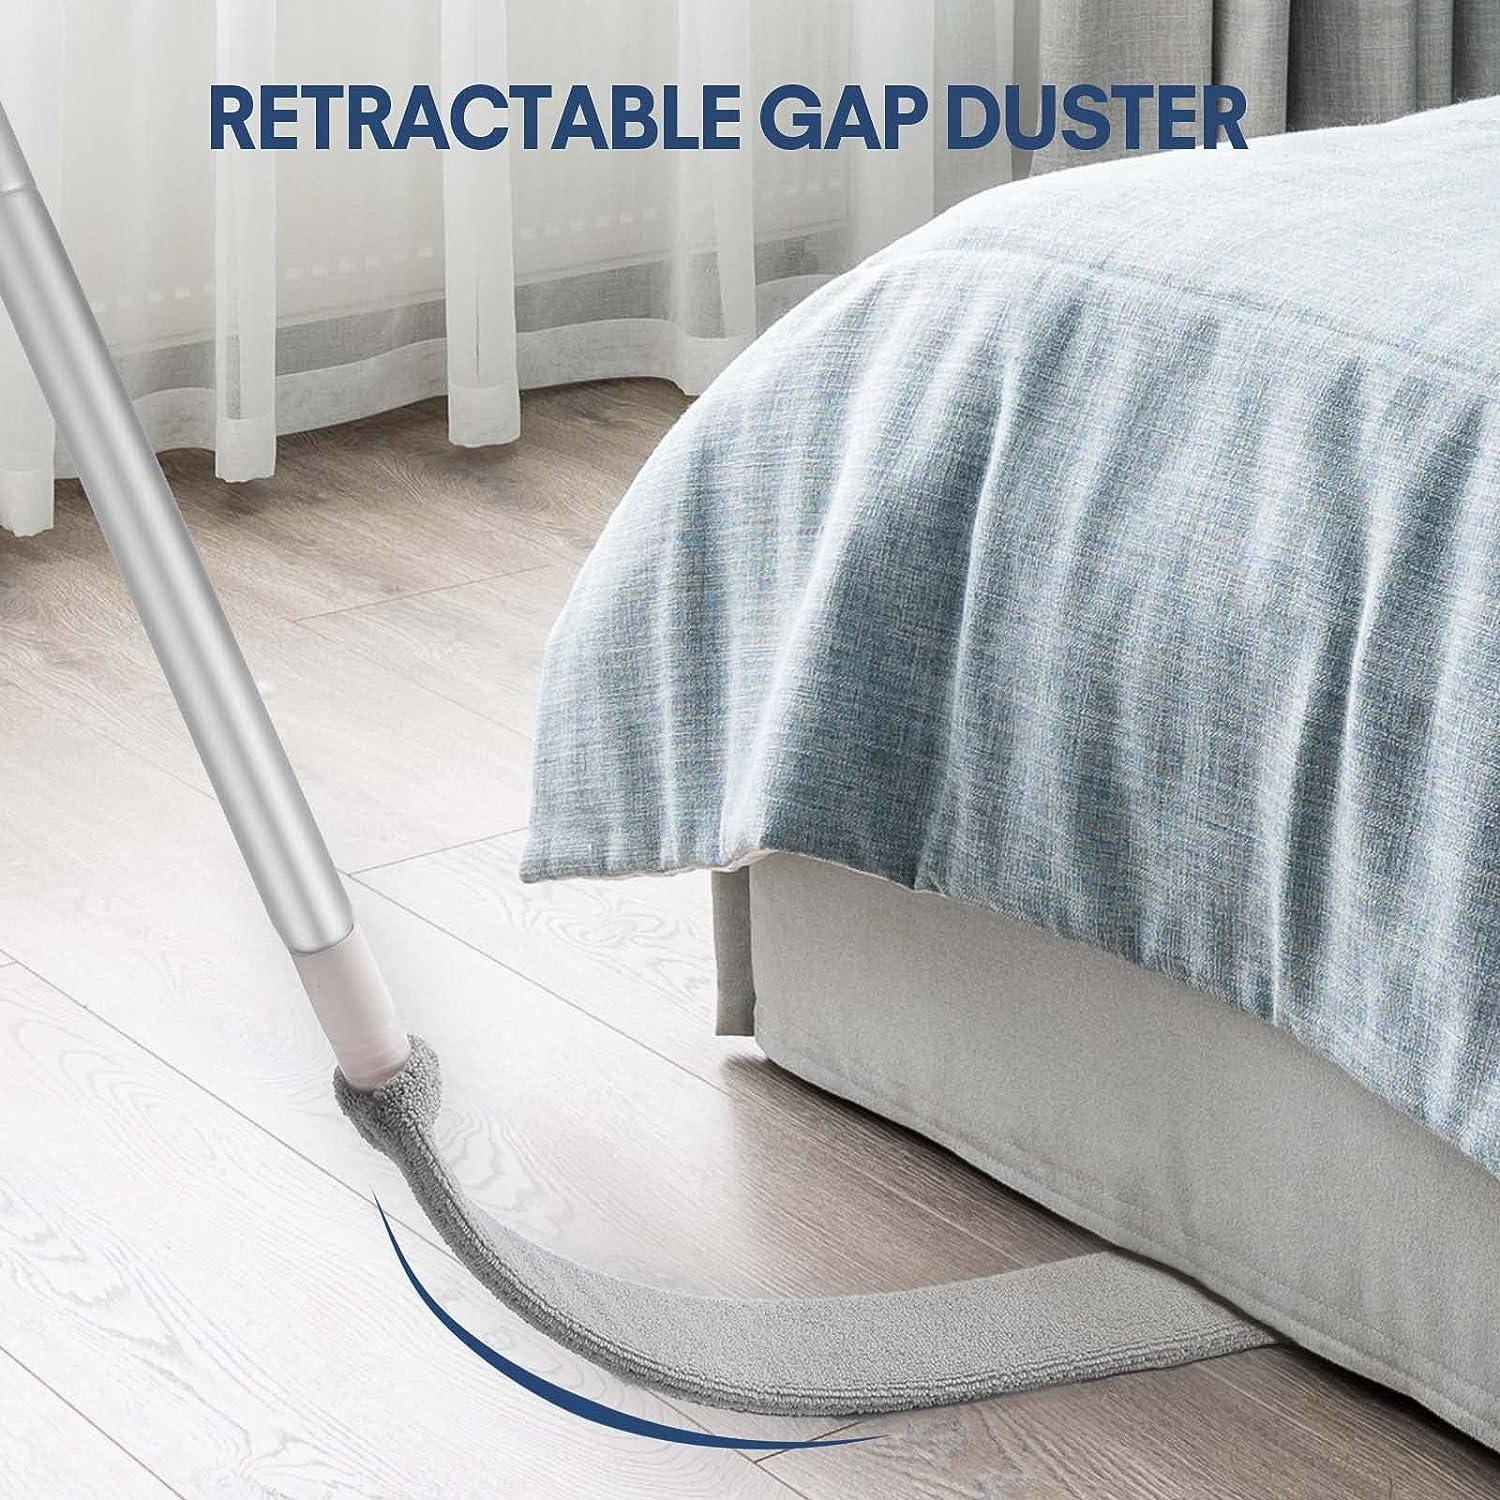 2 Pack Gap Cleaning Brush, Under Appliance Duster, Extendable Dusters  Retractable and Washable, Microfibre Feather Dusters Reusable for Home  Bedroom